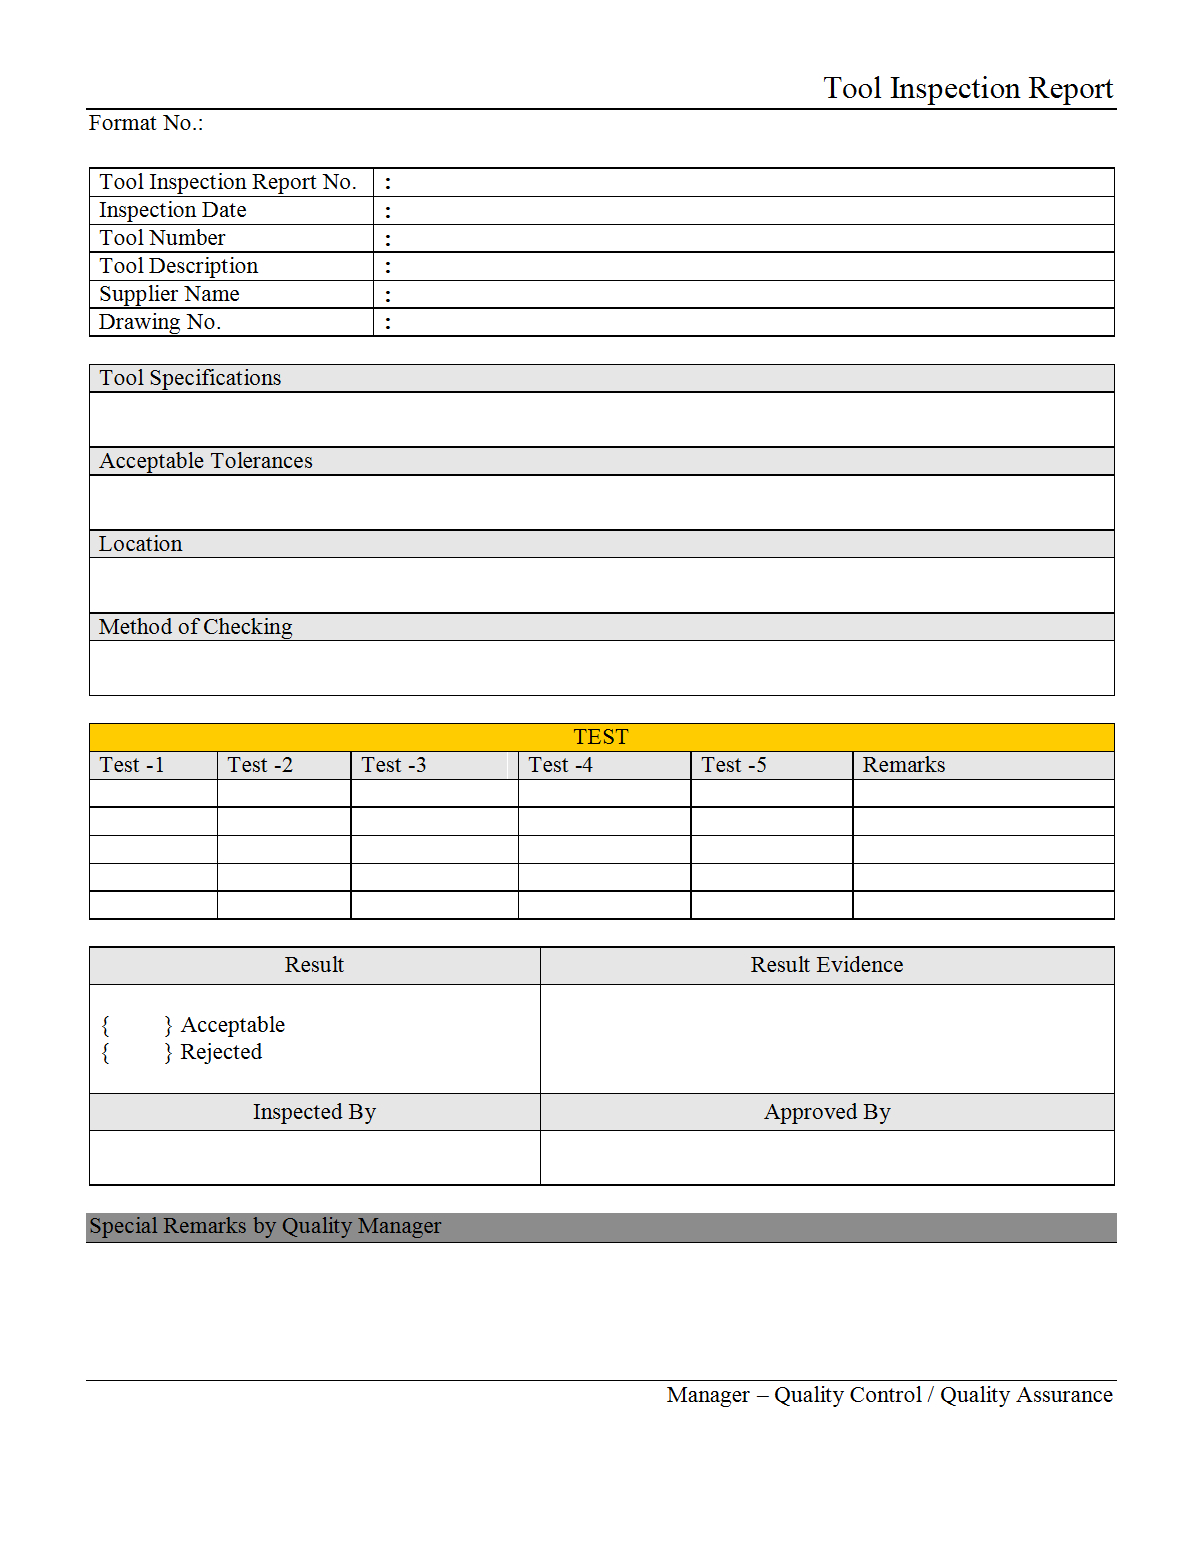 Tool Inspection Report – Inside Engineering Inspection Report Template